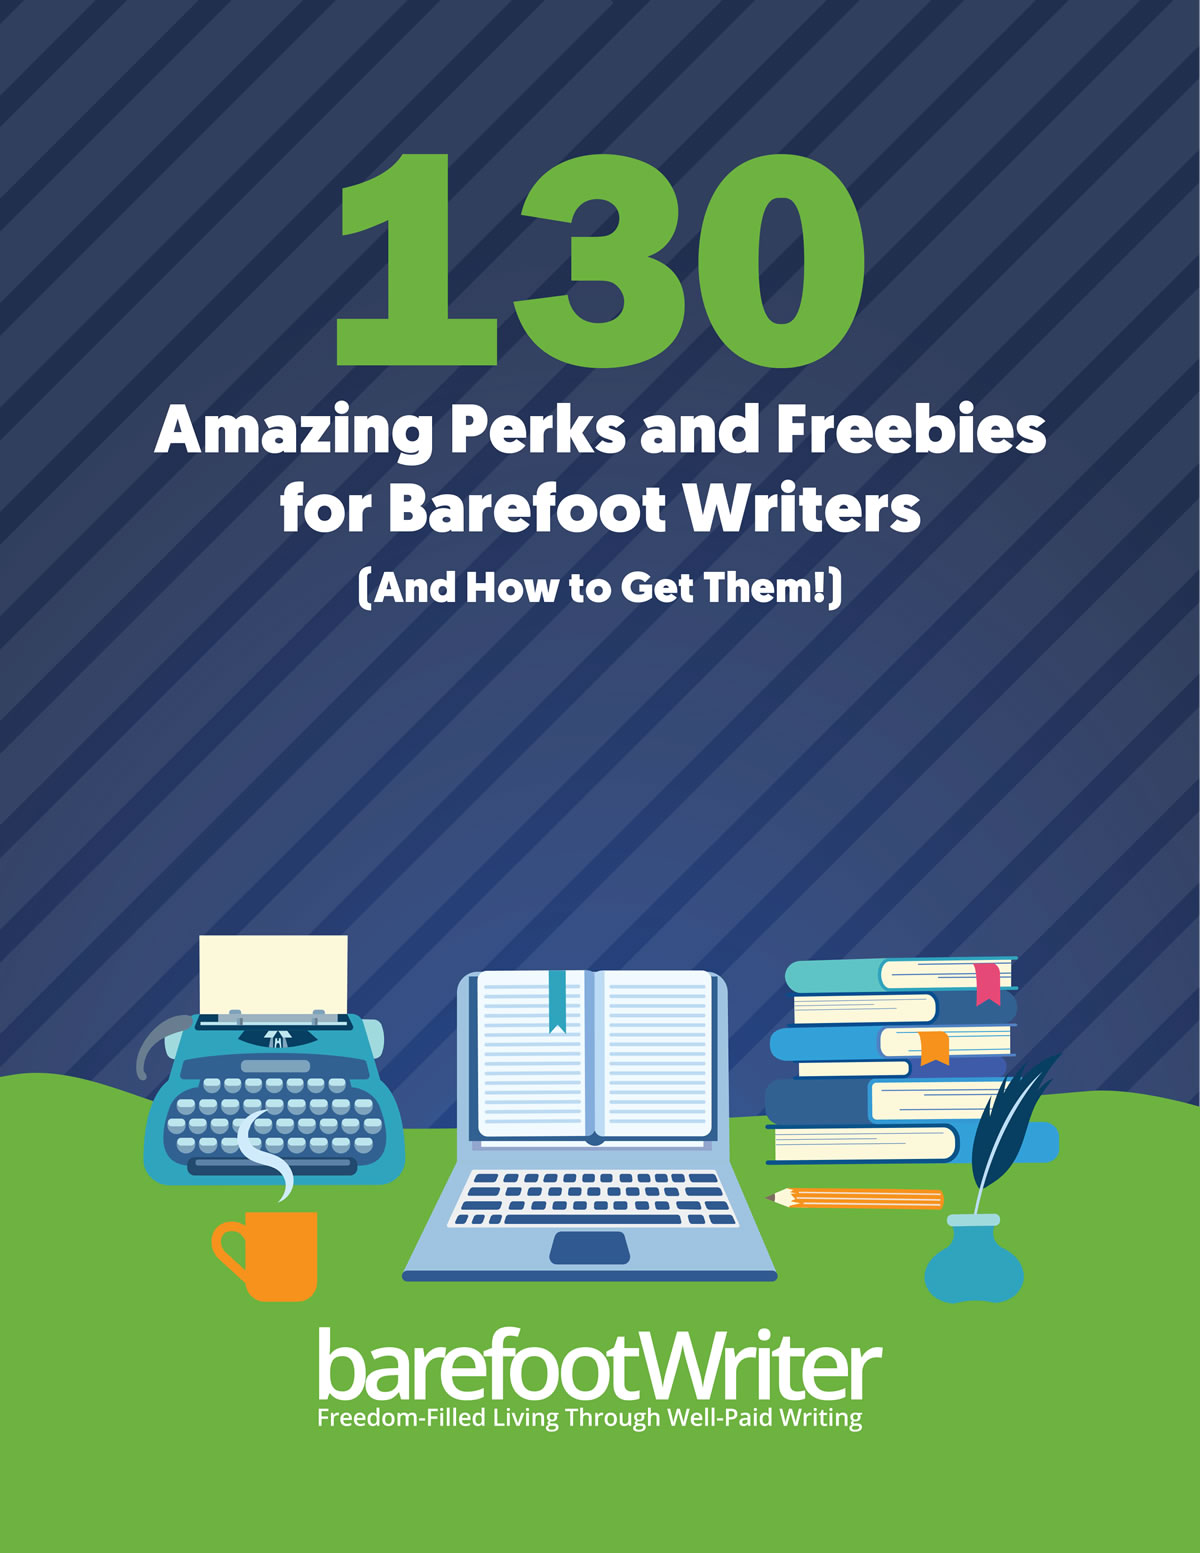 130 Amazing Perks & Freebies for Barefoot Writers Report Cover